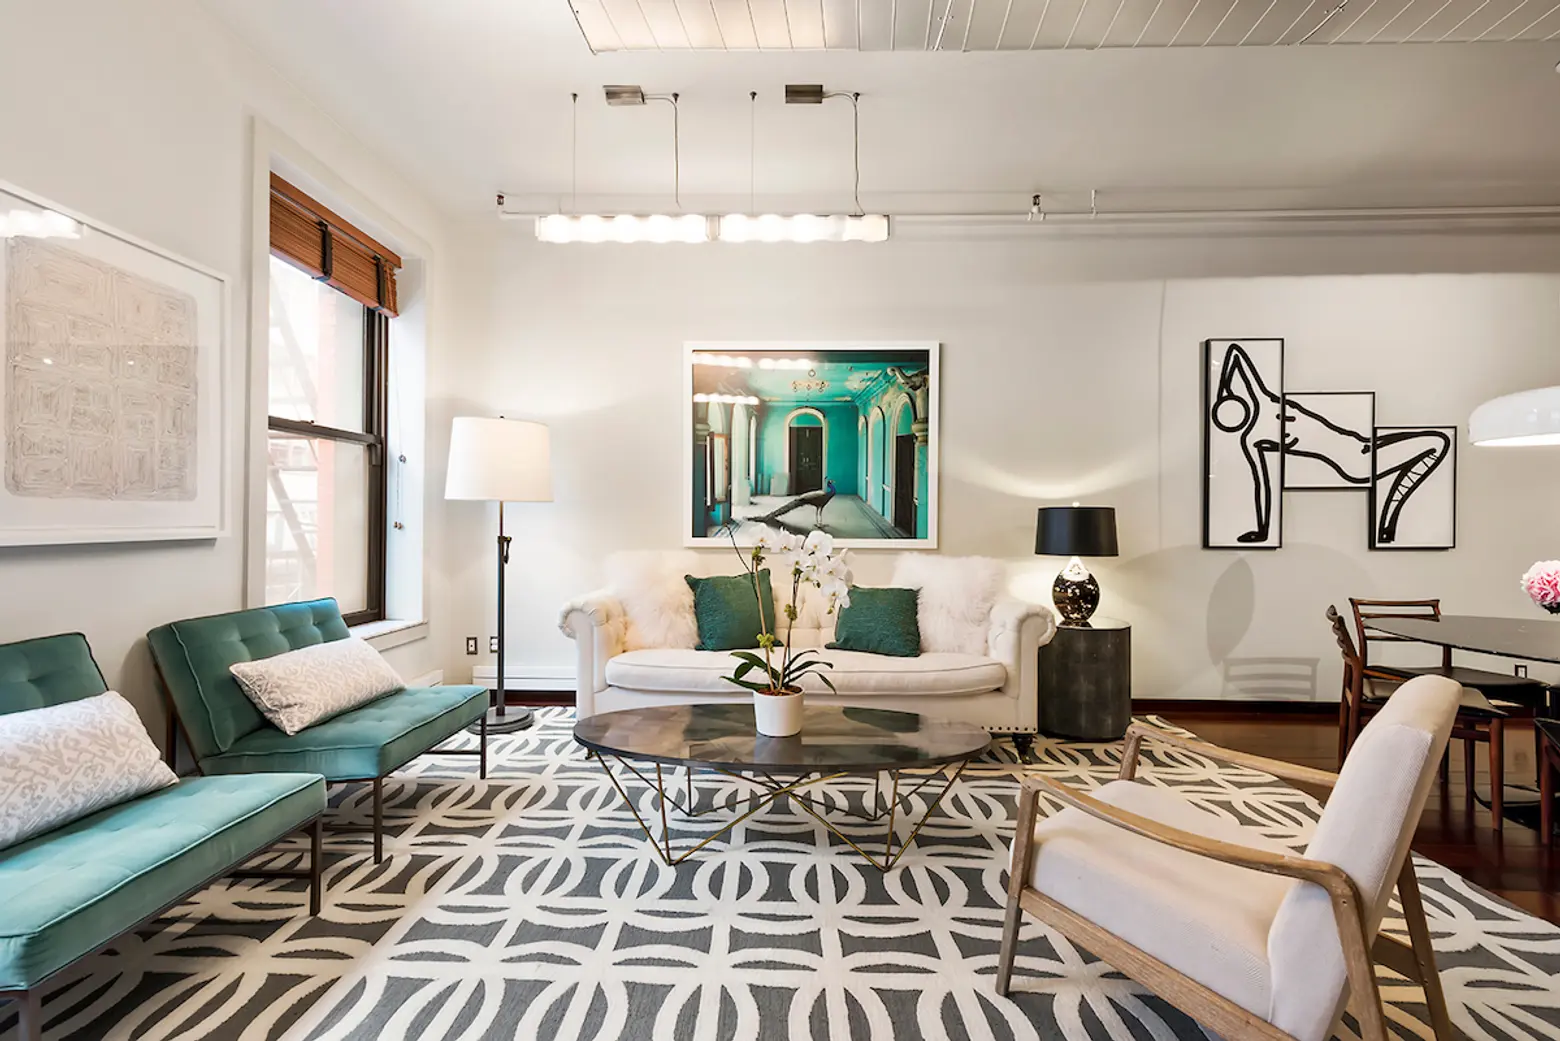 $2.8M Tribeca Pad Will Remind You Why You Love Lofts